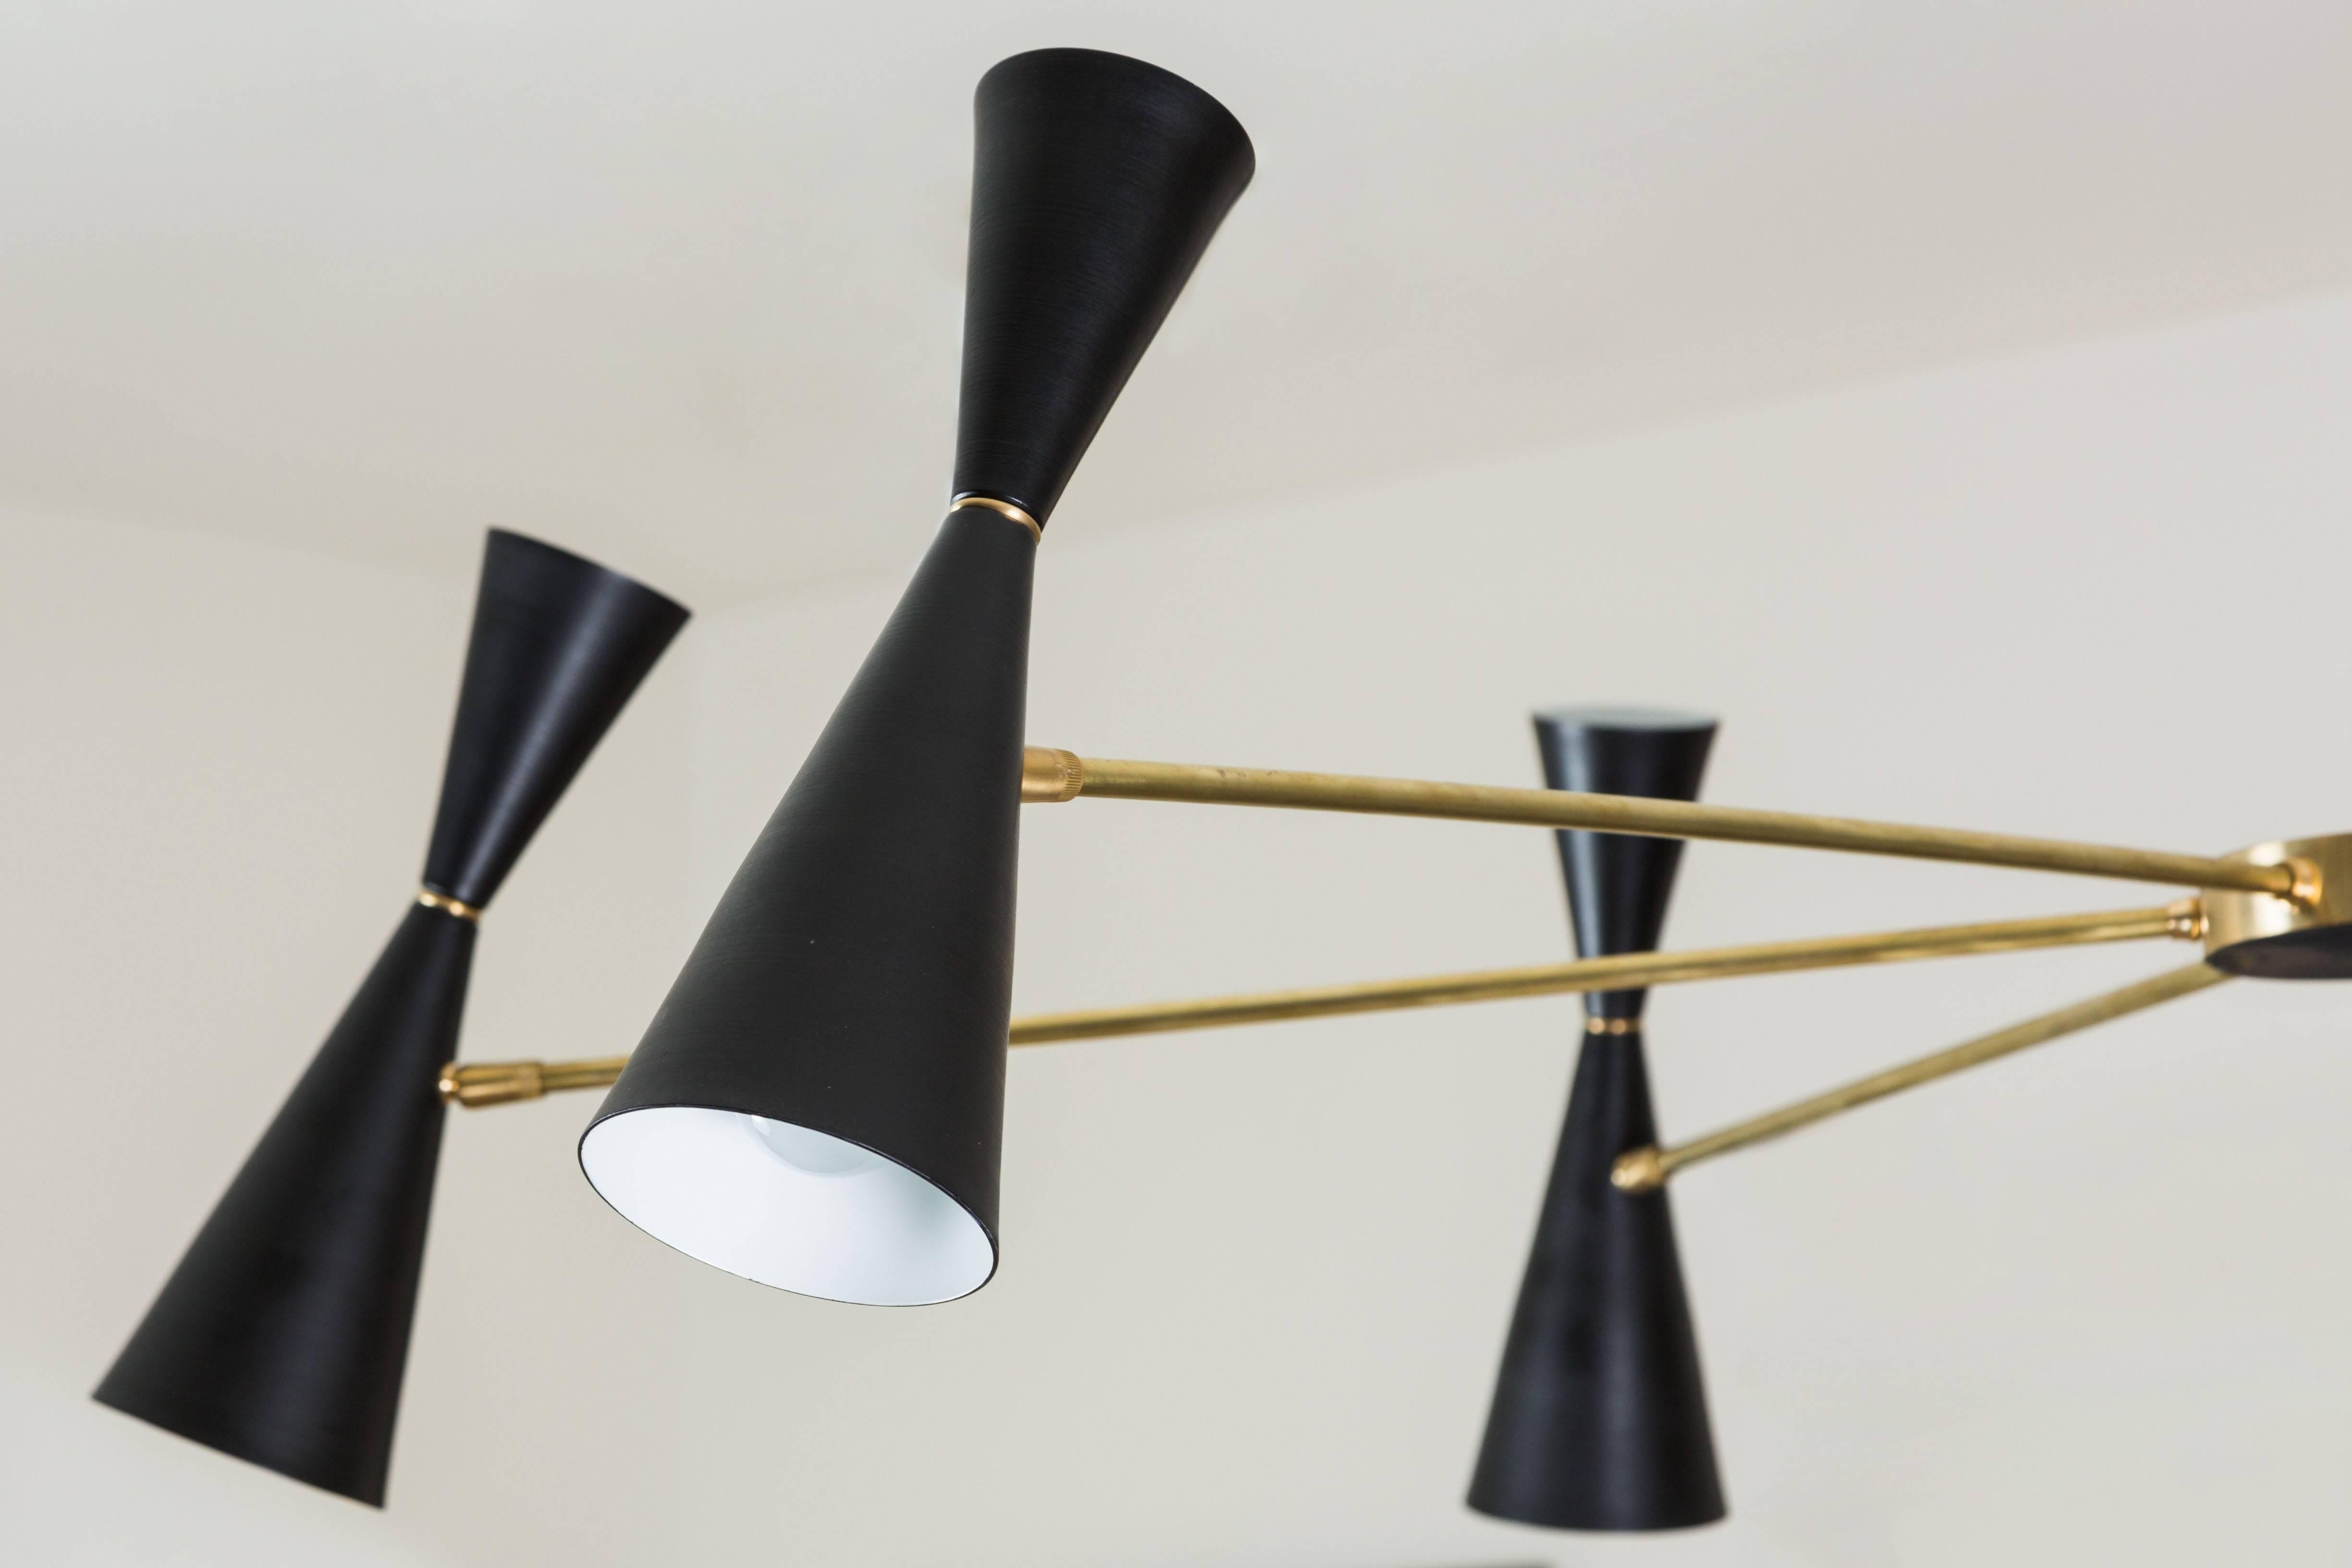 The Radial chandelier features six double cone shades that are centered around a spoked pendant. Available in gloss white or matte black powdercoat.

The Lawson-Fenning Collection is designed and handmade in Los Angeles, California.
 